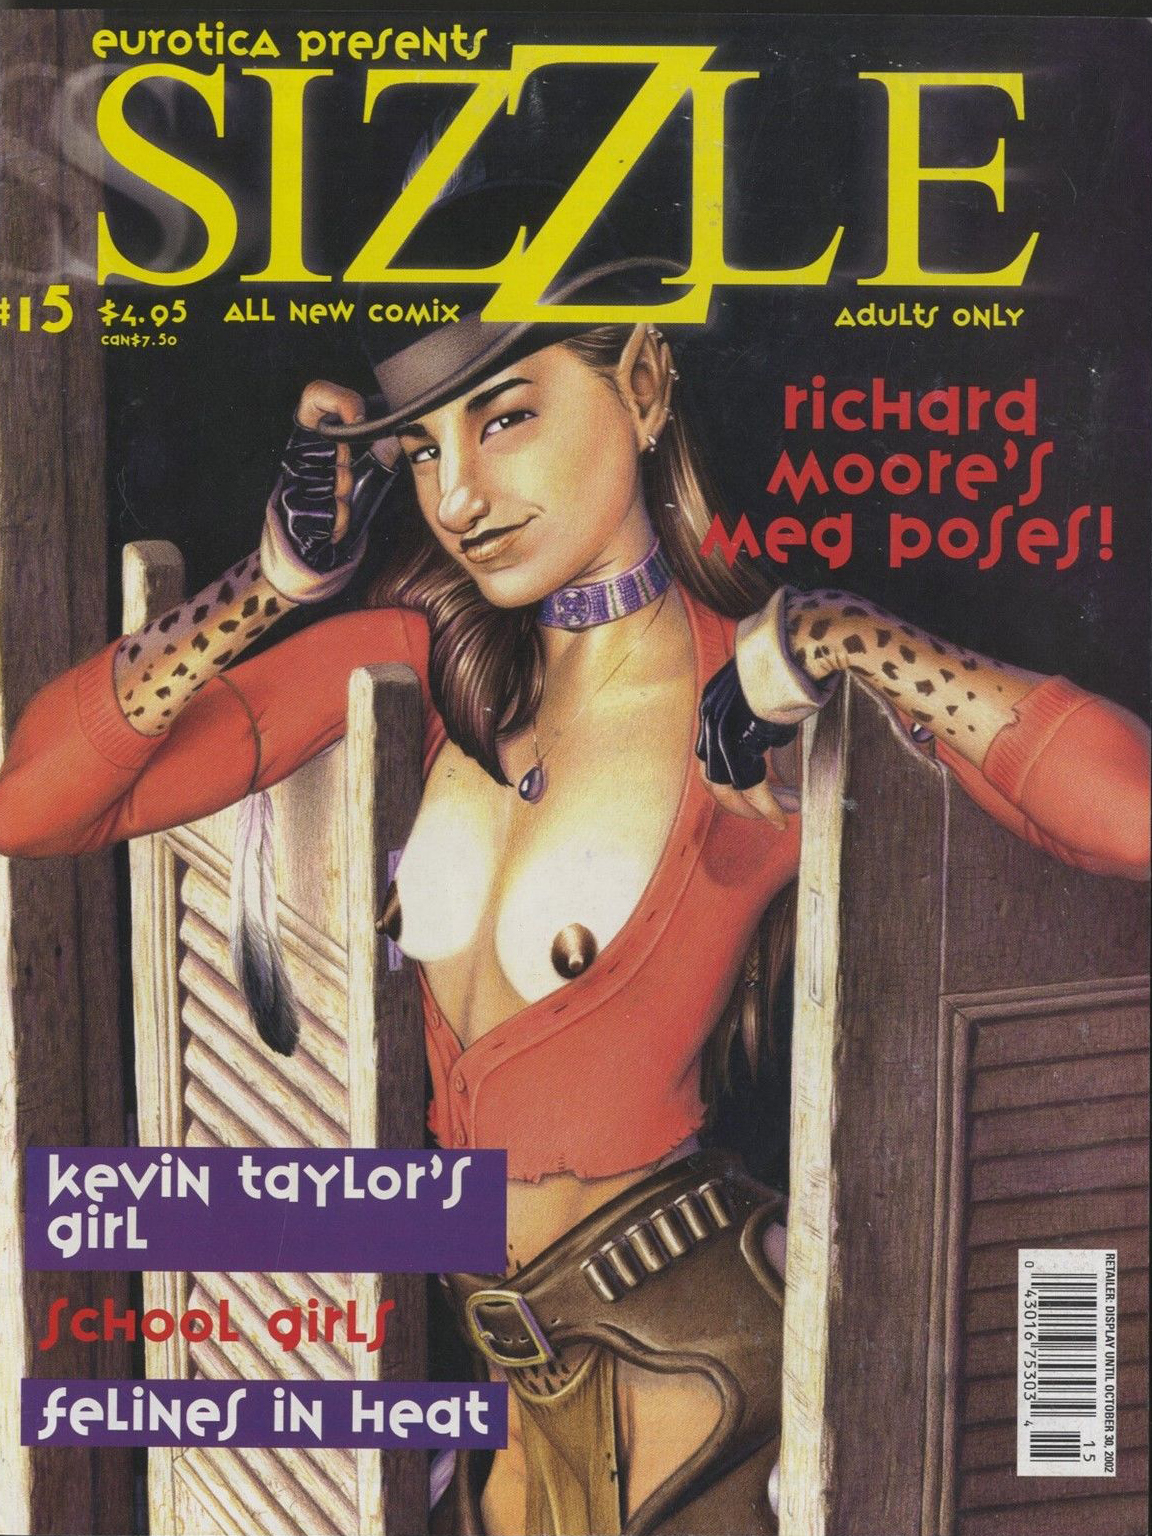 Sizzle by Eurotica # 15 magazine back issue Sizzle by Eurotica magizine back copy 